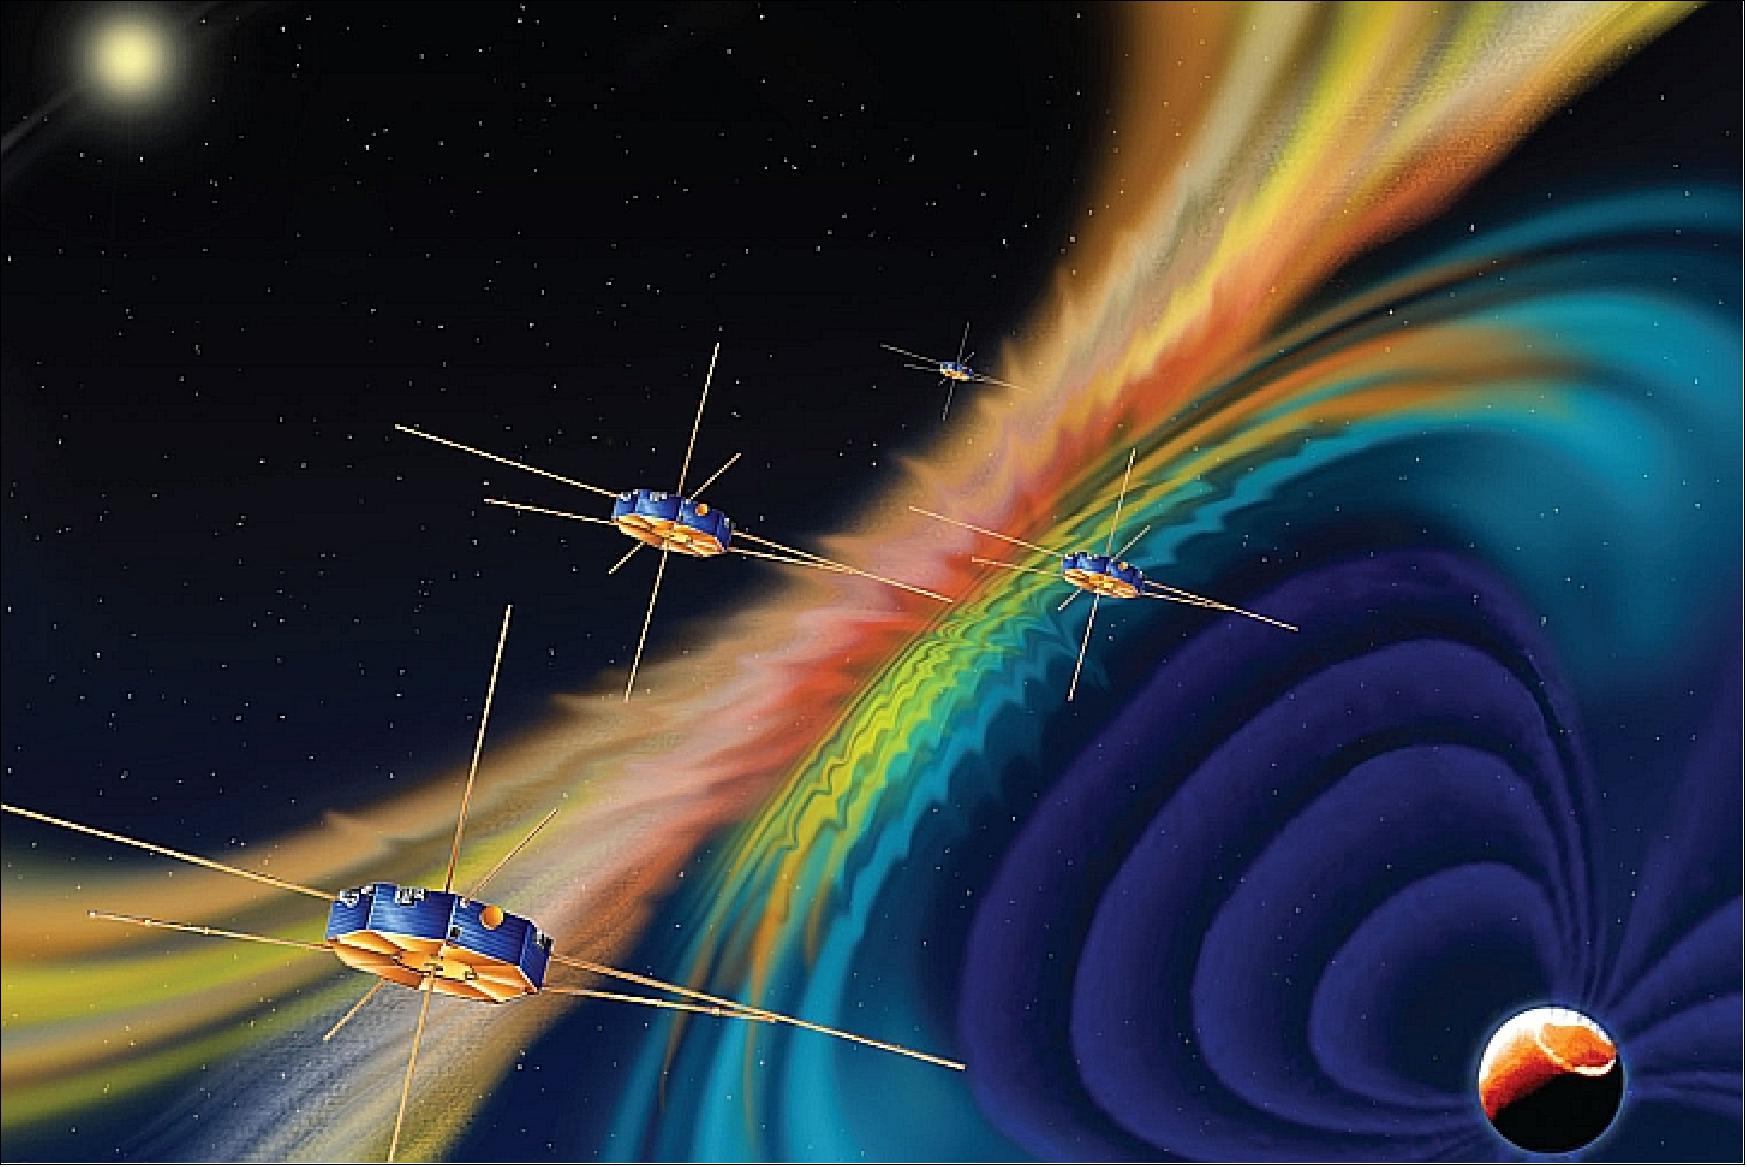 Figure 2: Artist's rendition of the MMS mission in Earth's magnetosphere (image credit: NASA, SwRI)